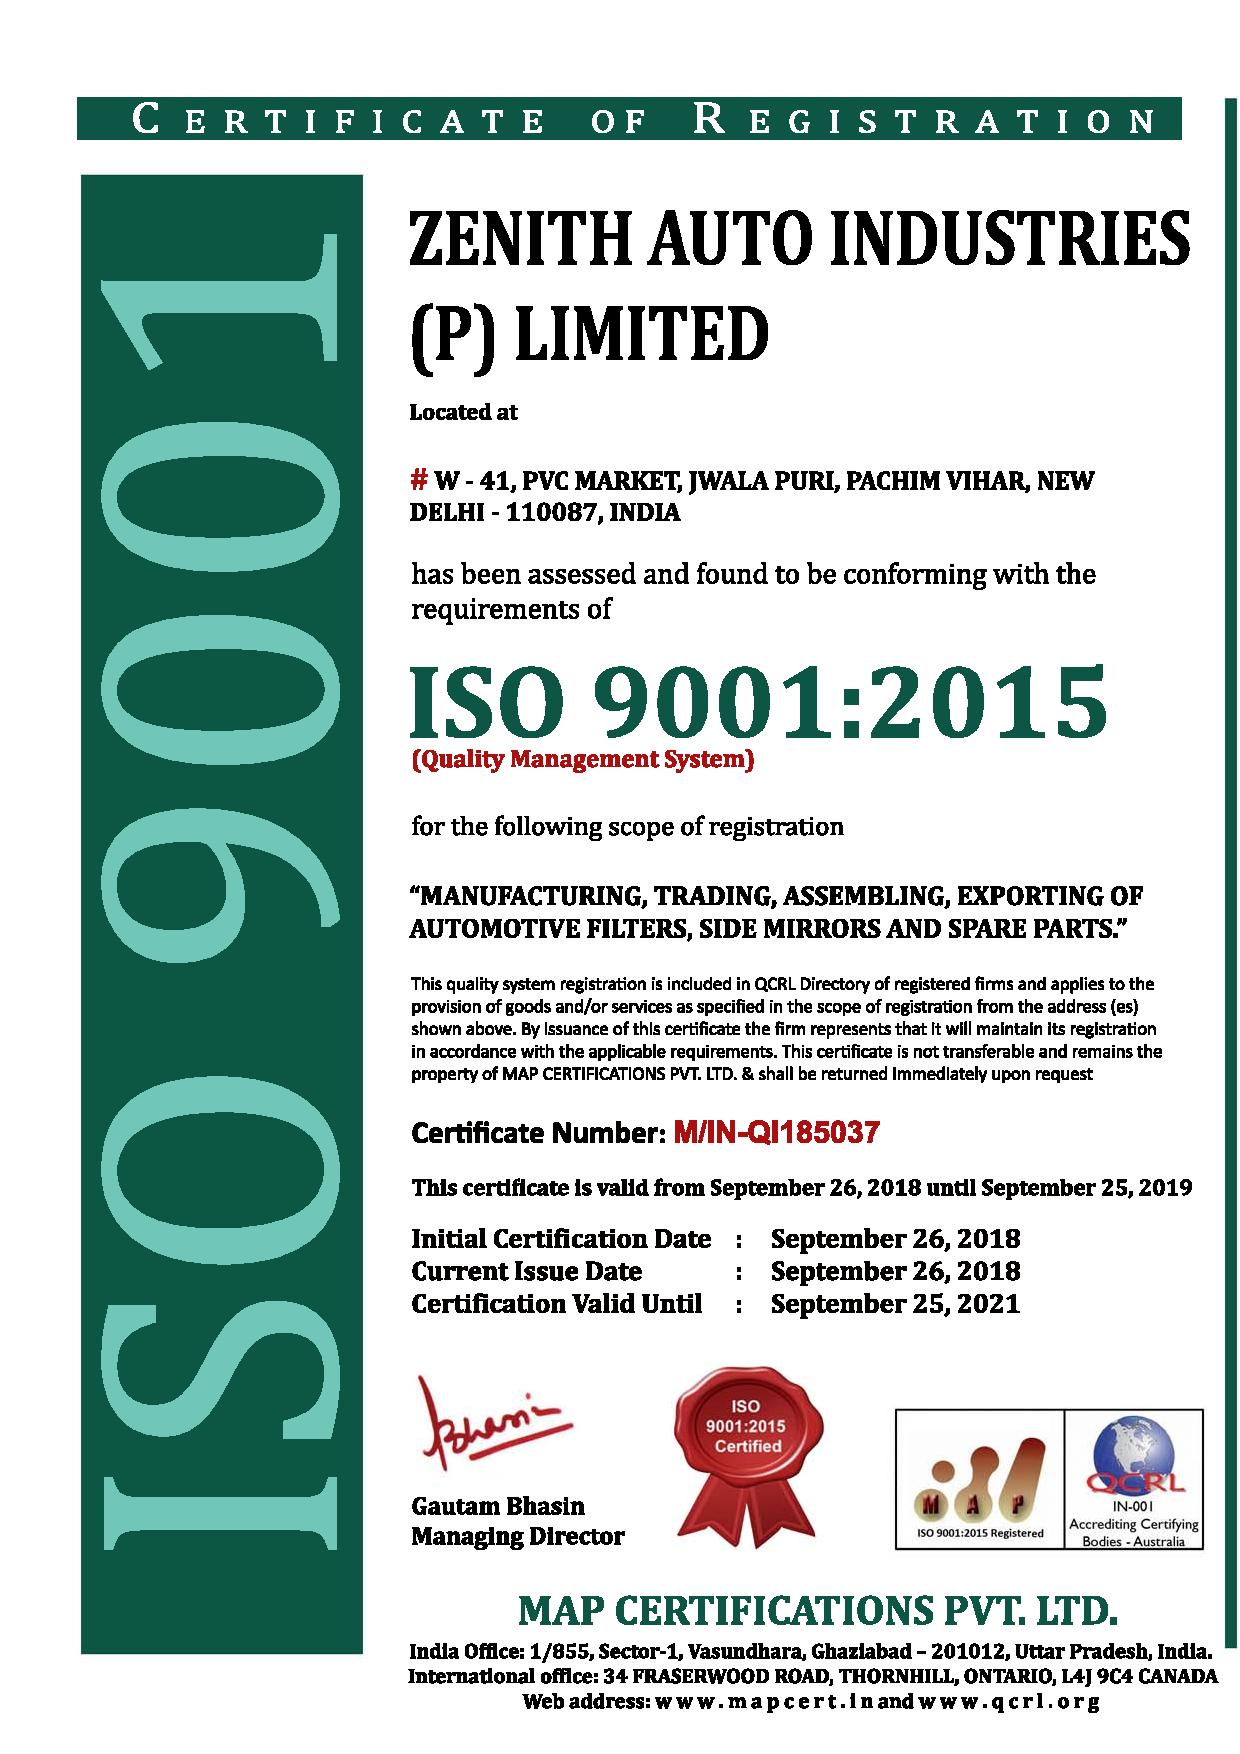 Zenith Filters : ISO 9001 : 2105 CERTIFIED
ISO 14001 : 2015 CERTIFIED 